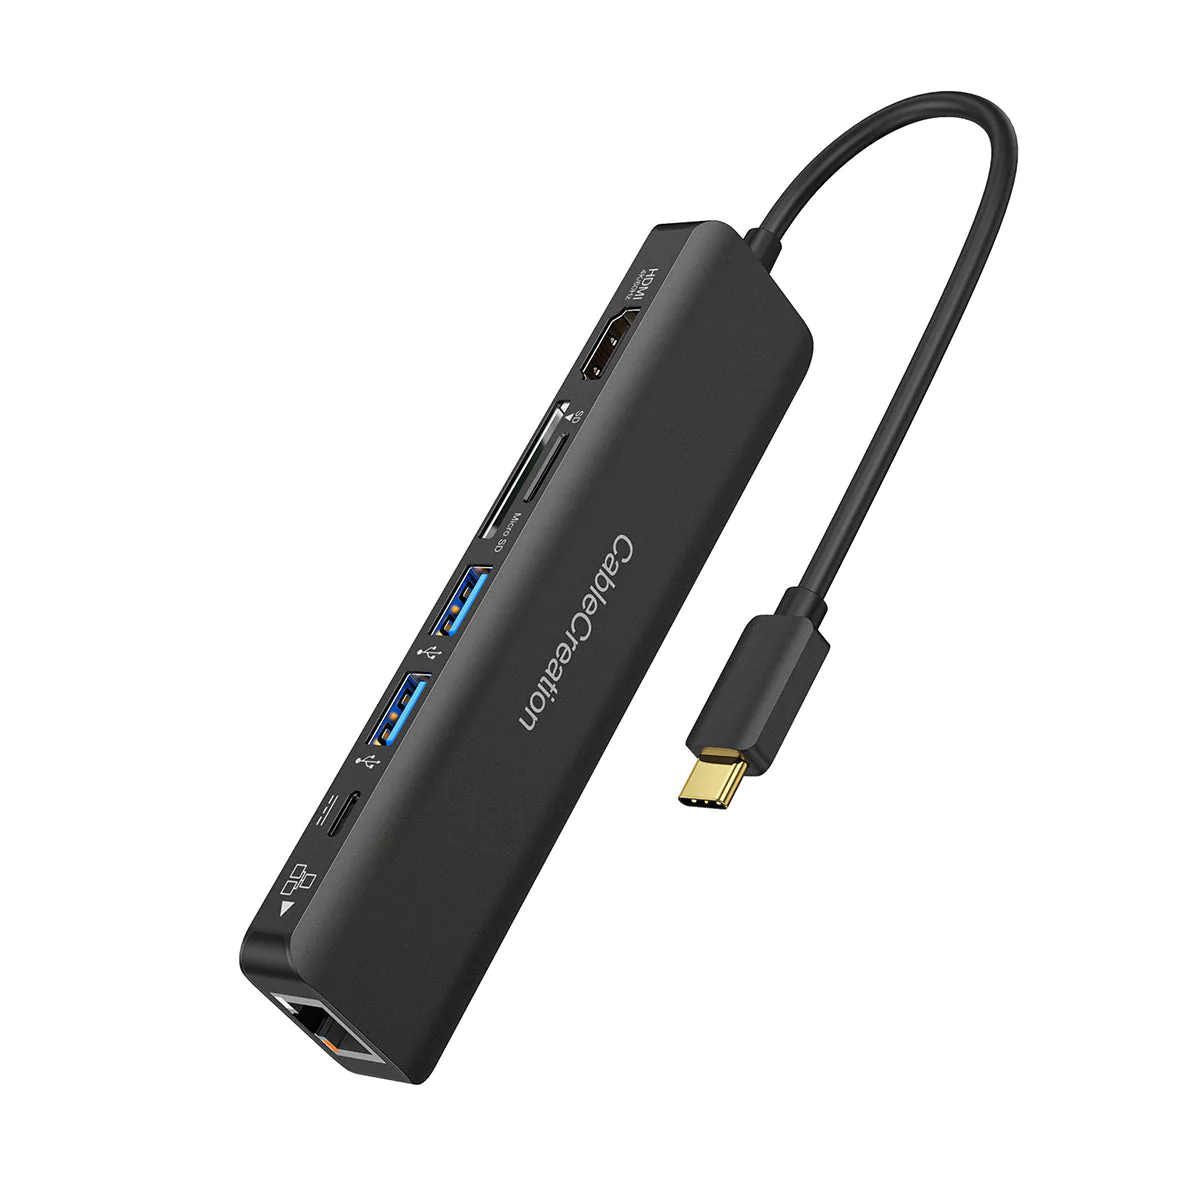 The CableCreation's USB Adapter Will Connect Your Laptop To Your TV